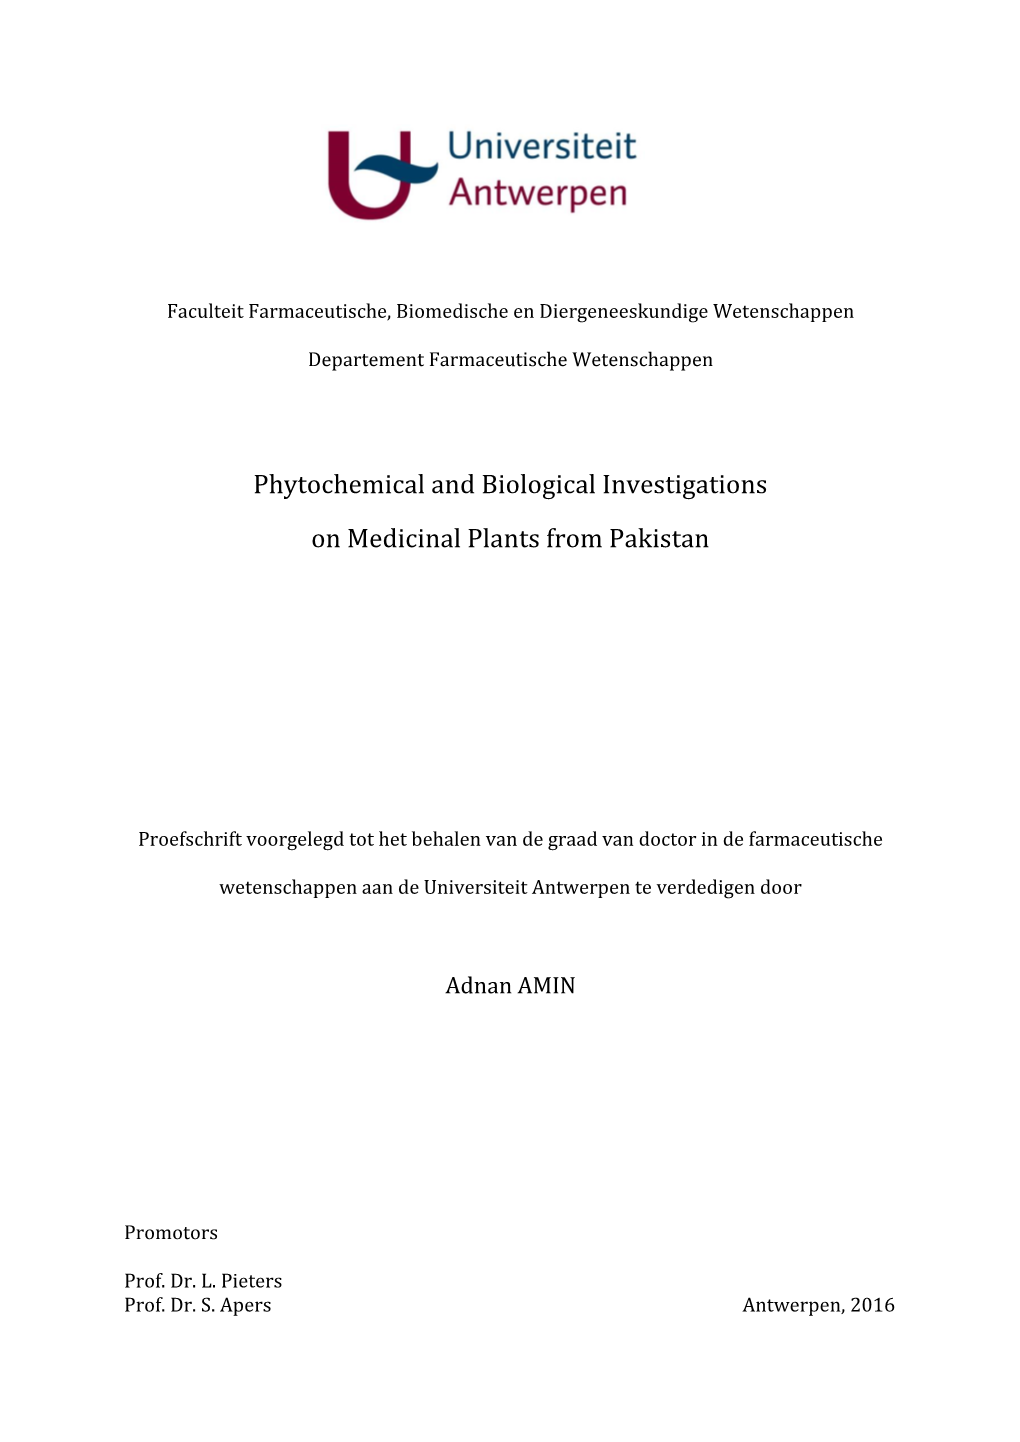 Phytochemical and Biological Investigations on Medicinal Plants from Pakistan